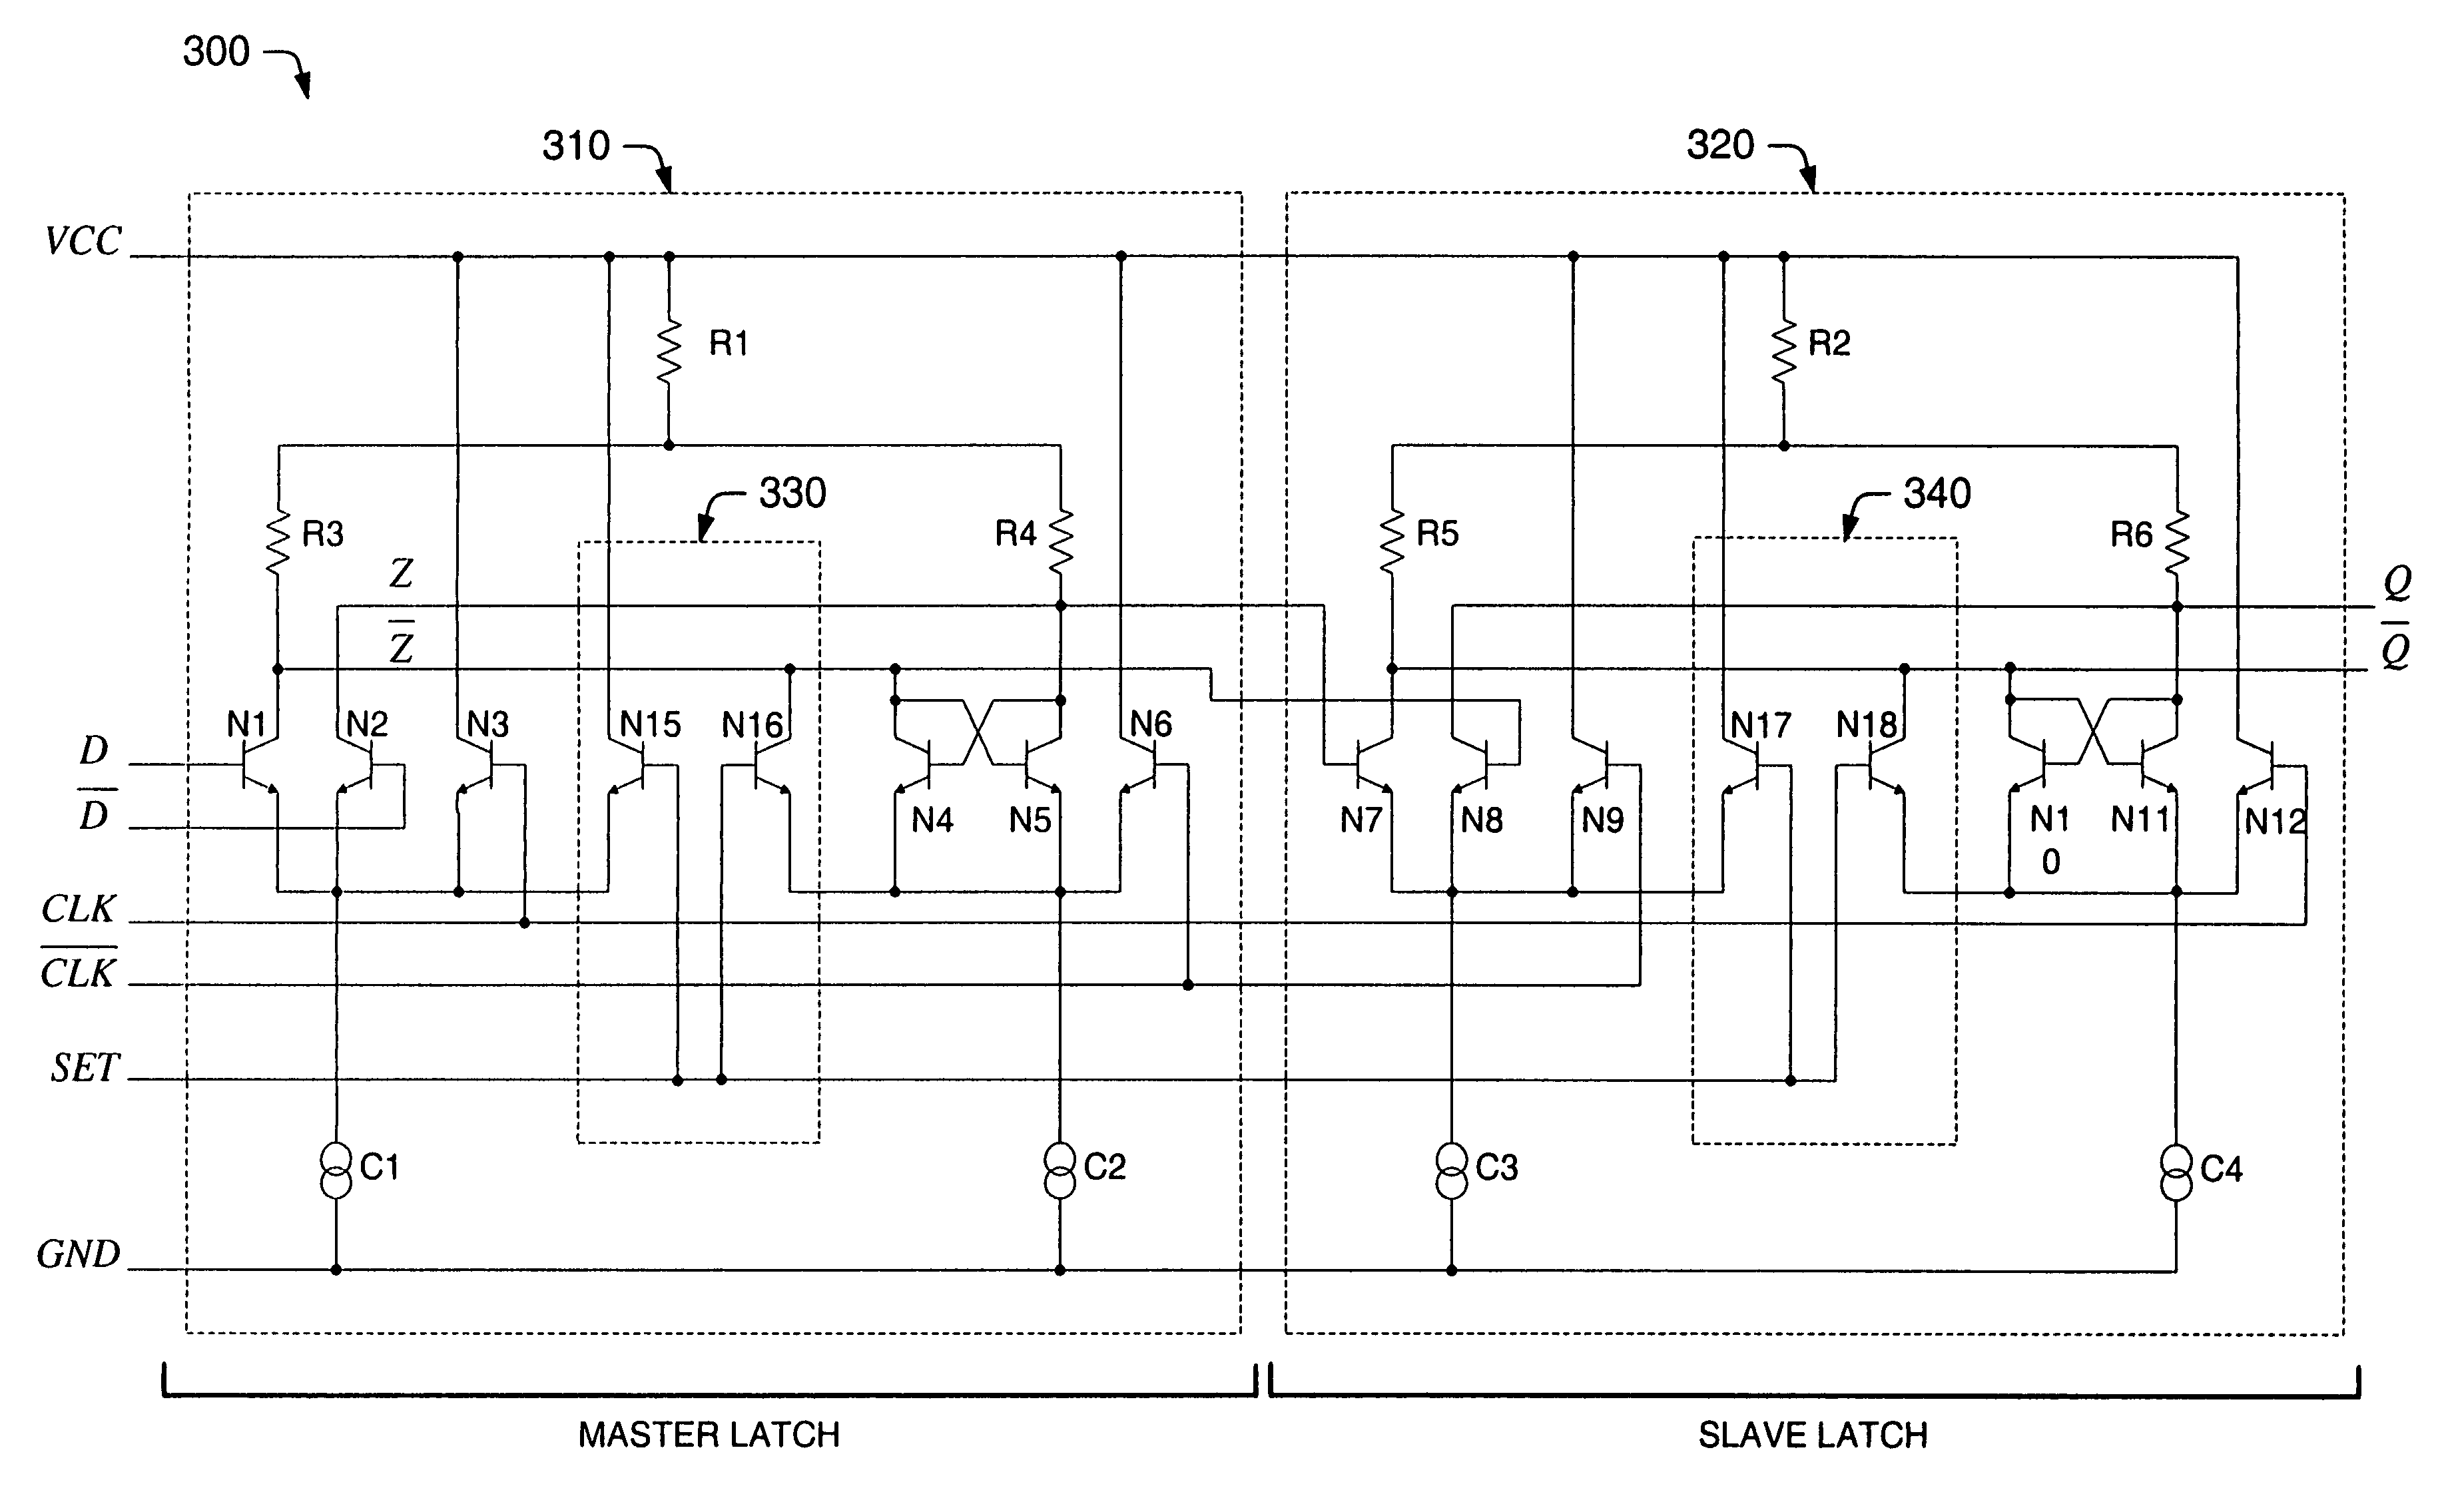 Low voltage logic circuit with set and/or reset functionality